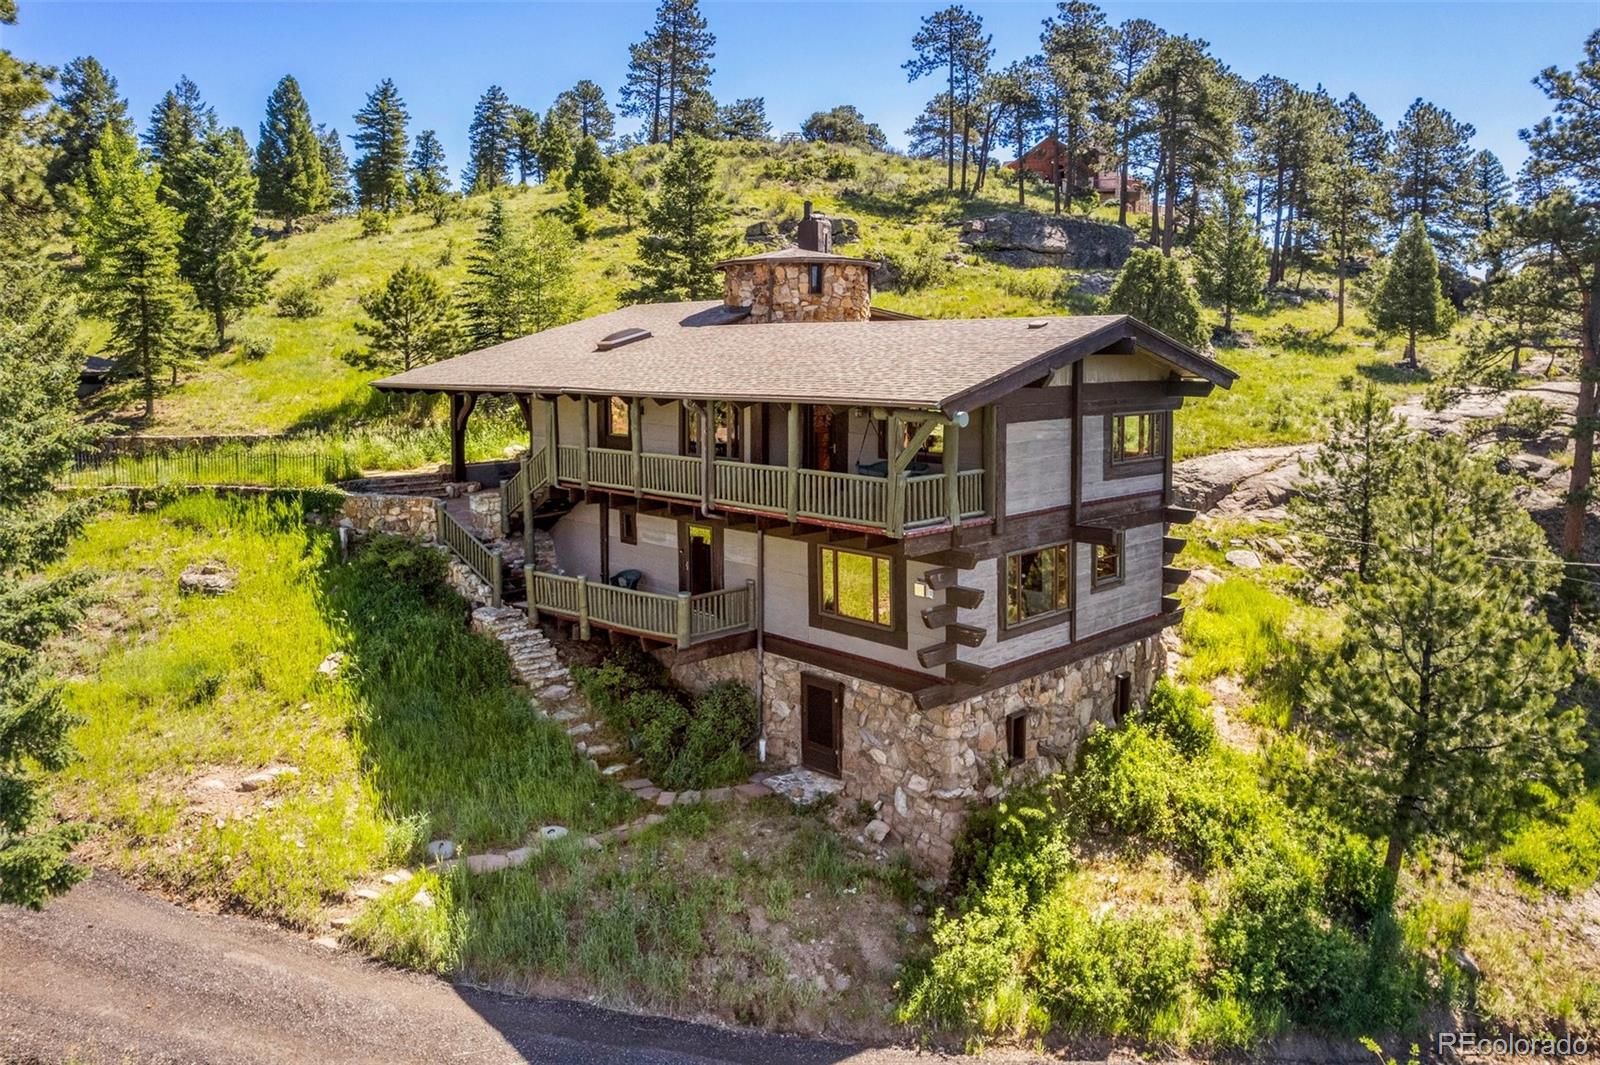 7365  heiter hill road, Evergreen sold home. Closed on 2023-09-29 for $1,075,000.